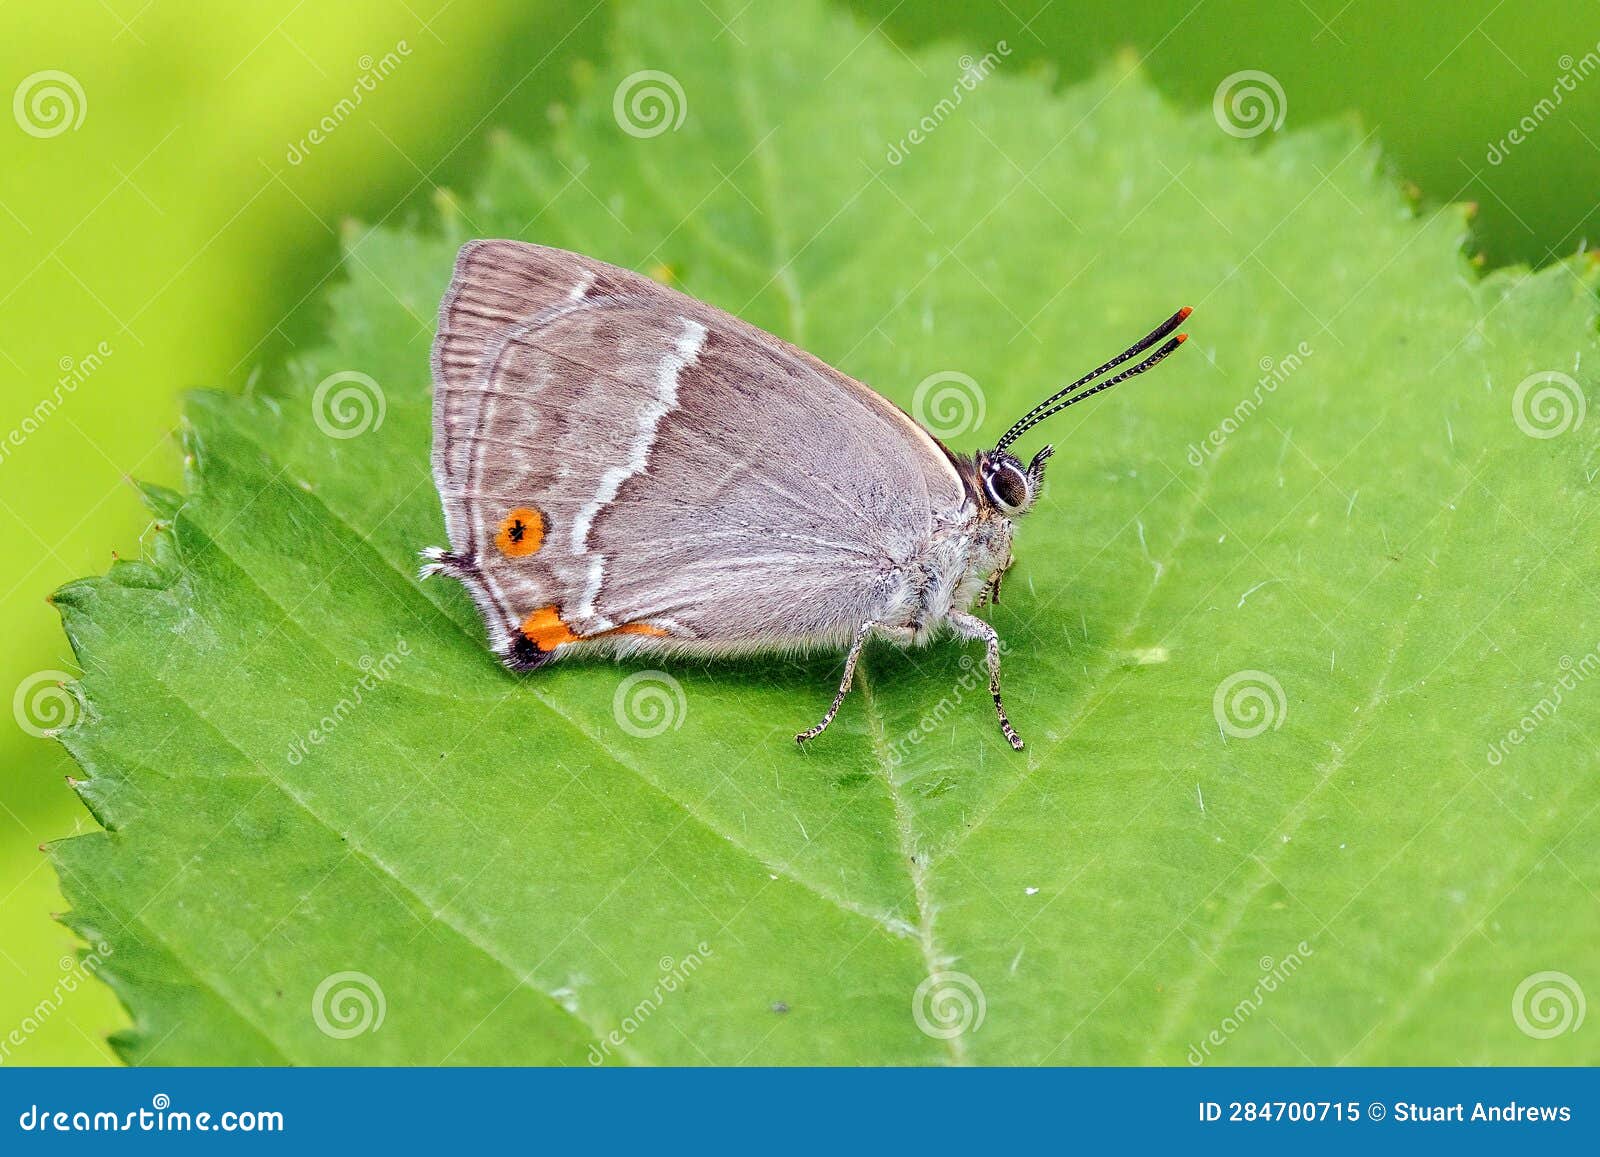 purple hairstreak butterfly - favonius quercus at rest with wings closed.